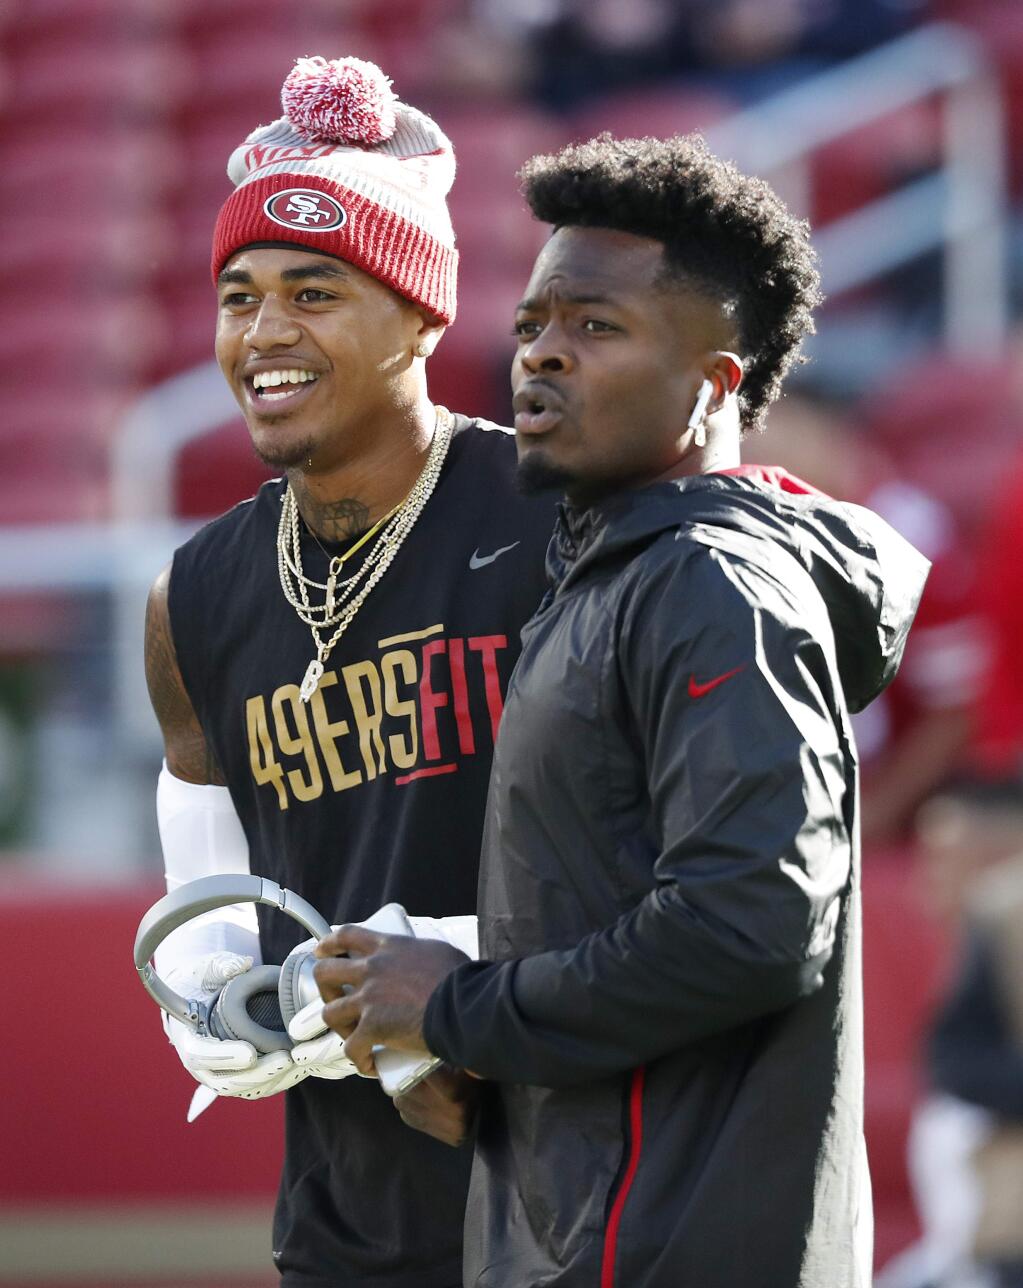 San Francisco 49ers wide receiver Kendrick Bourne, left, talks with wide receiver Marquise Goodwin before an NFL football game against the Chicago Bears in Santa Clara, Calif., Sunday, Dec. 23, 2018. (AP Photo/Tony Avelar)